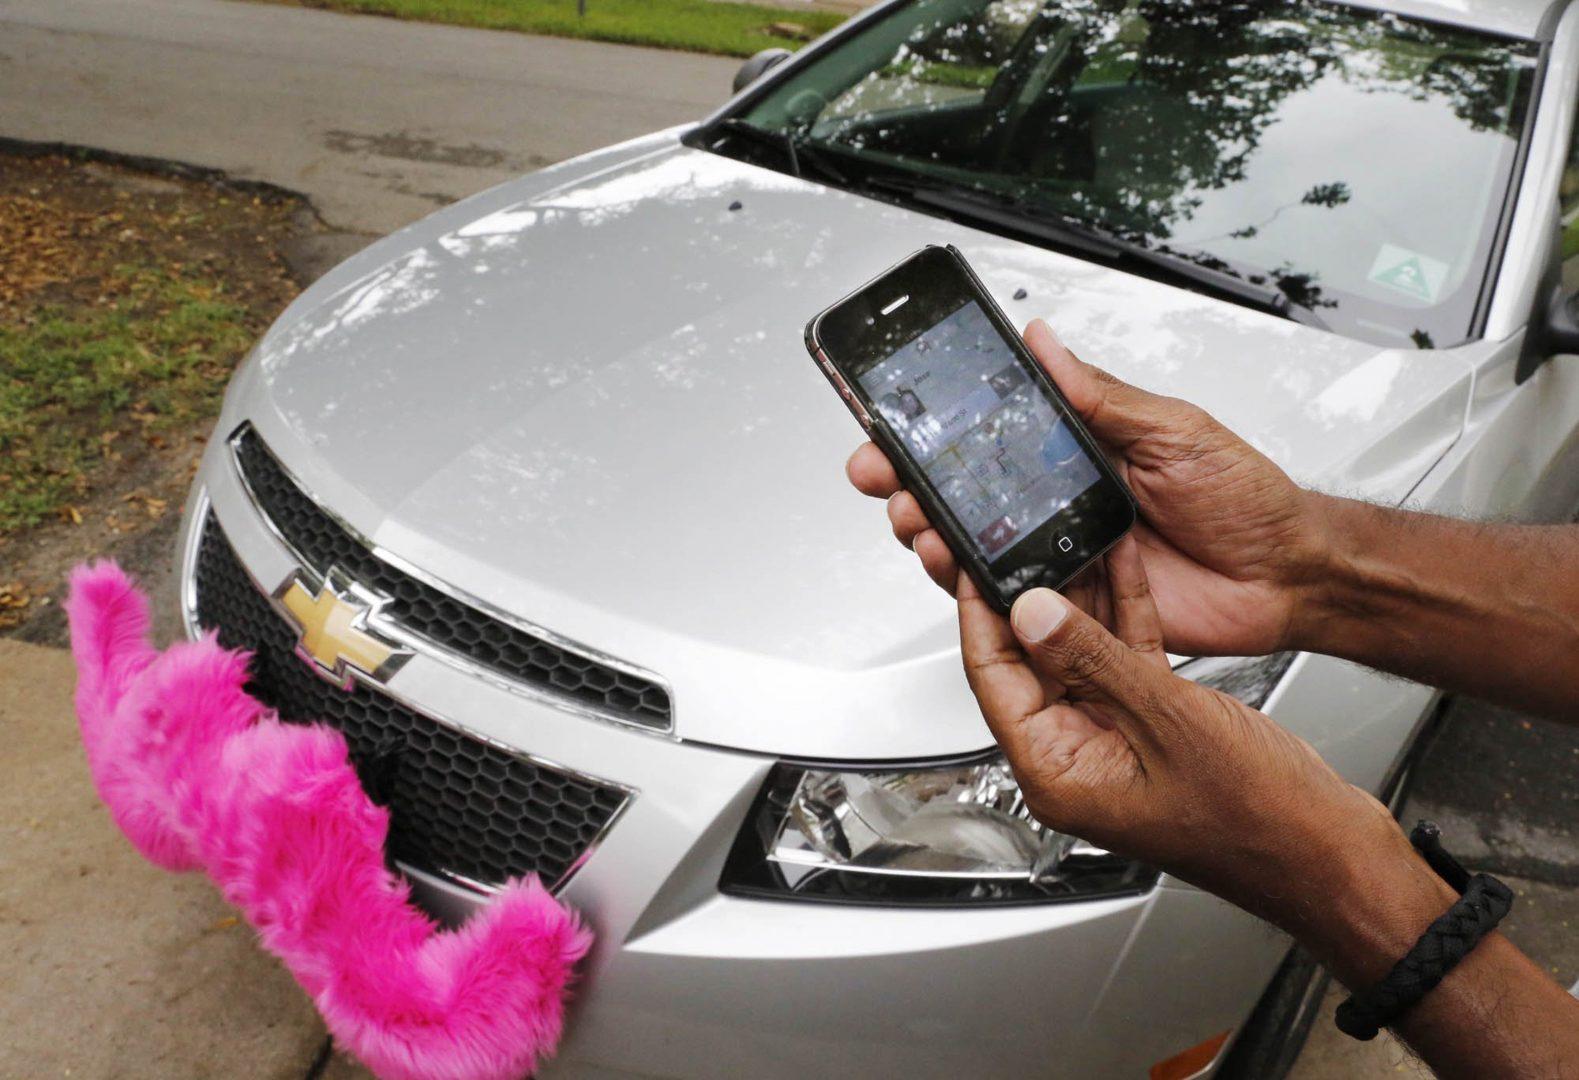 The Lyft app allows users to request a ride in Miami on June 4, 2014. Regulators across the U.S. and in Europe are struggling with how to control the digital-dispatch services that have upended the transportation business. (Jose A. Iglesias/Miami Herald/MCT)